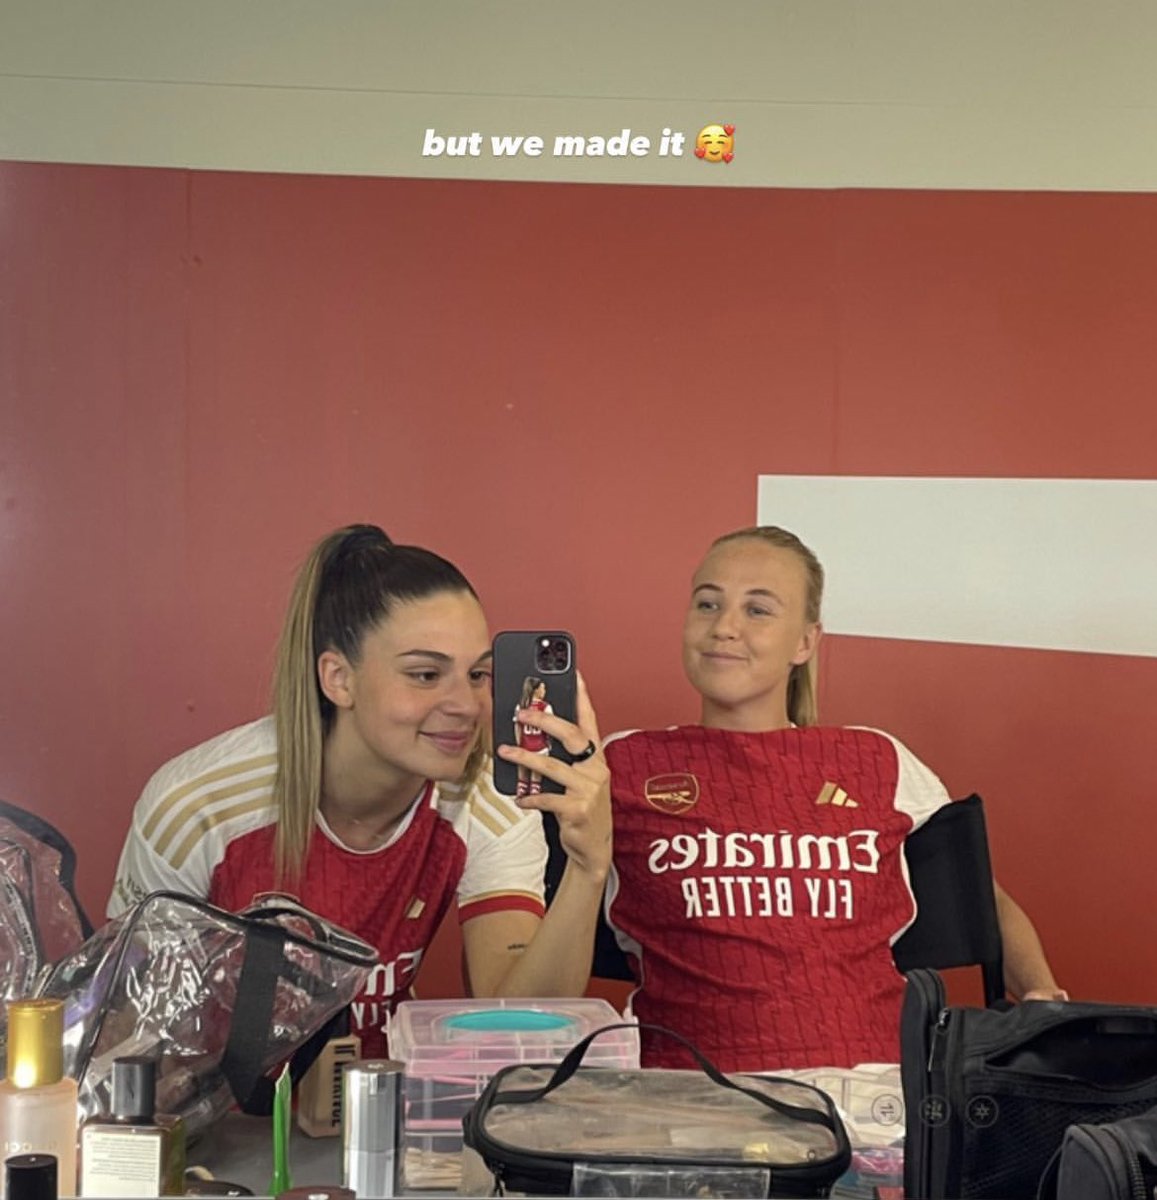 Arsenal Women’s Gio Queiroz accidentally leaking the new Arsenal home kit on her Instagram story, alongside Beth Mead. 👀😂 [@awfclips] #afc